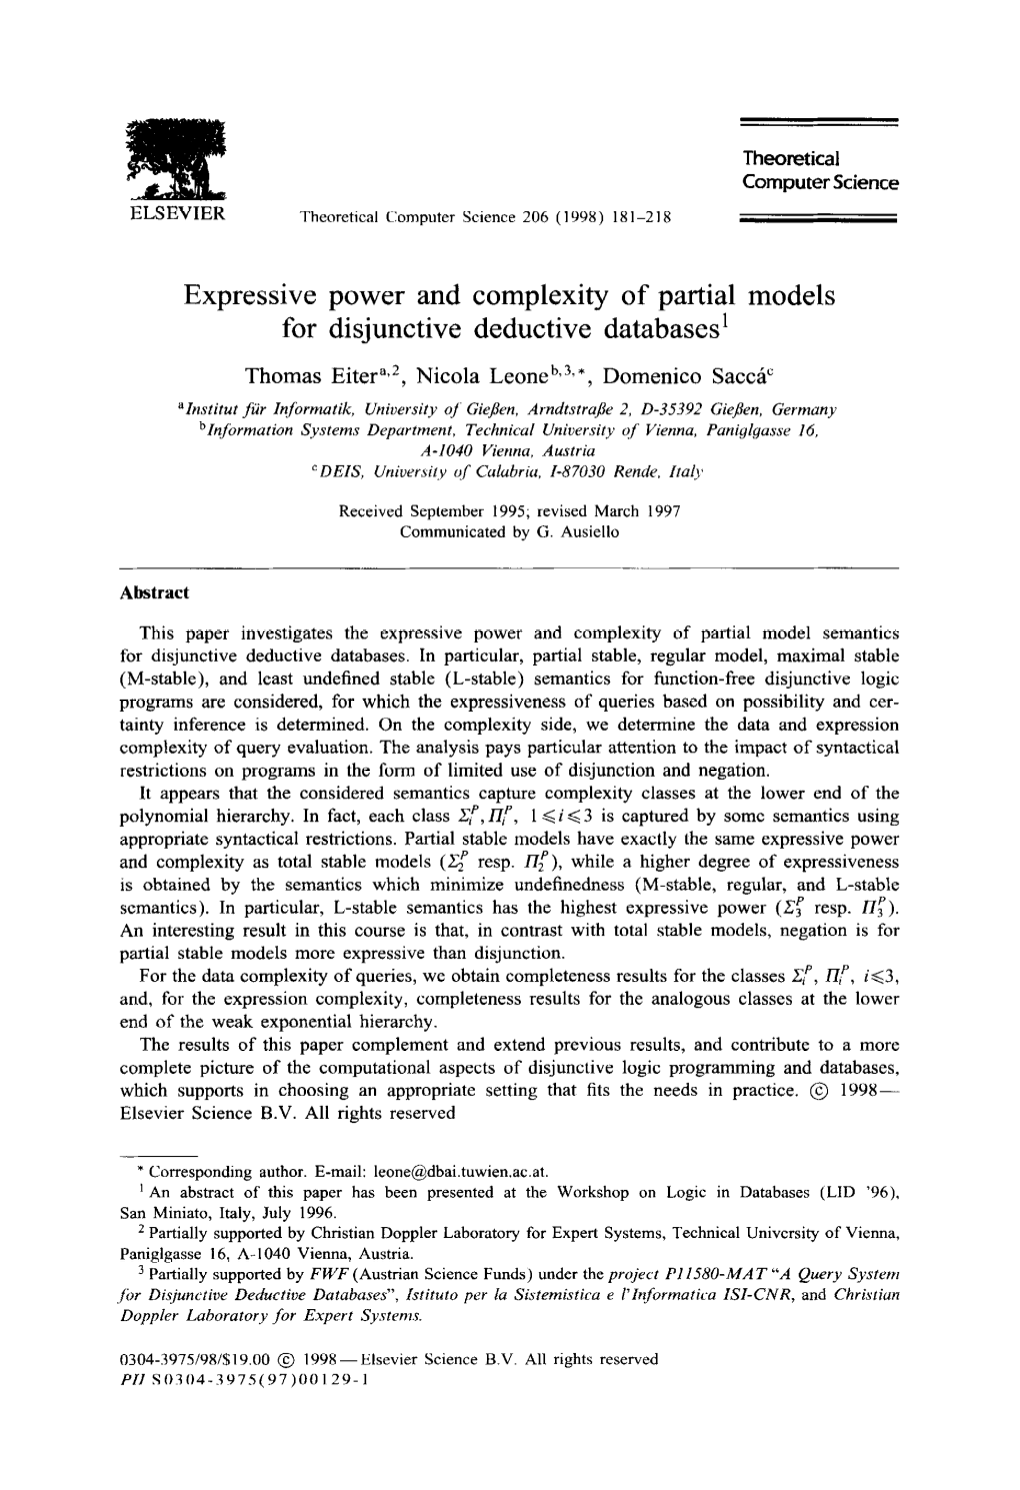 Expressive Power and Complexity of Partial Models for Disjunctive Deductive Databases’